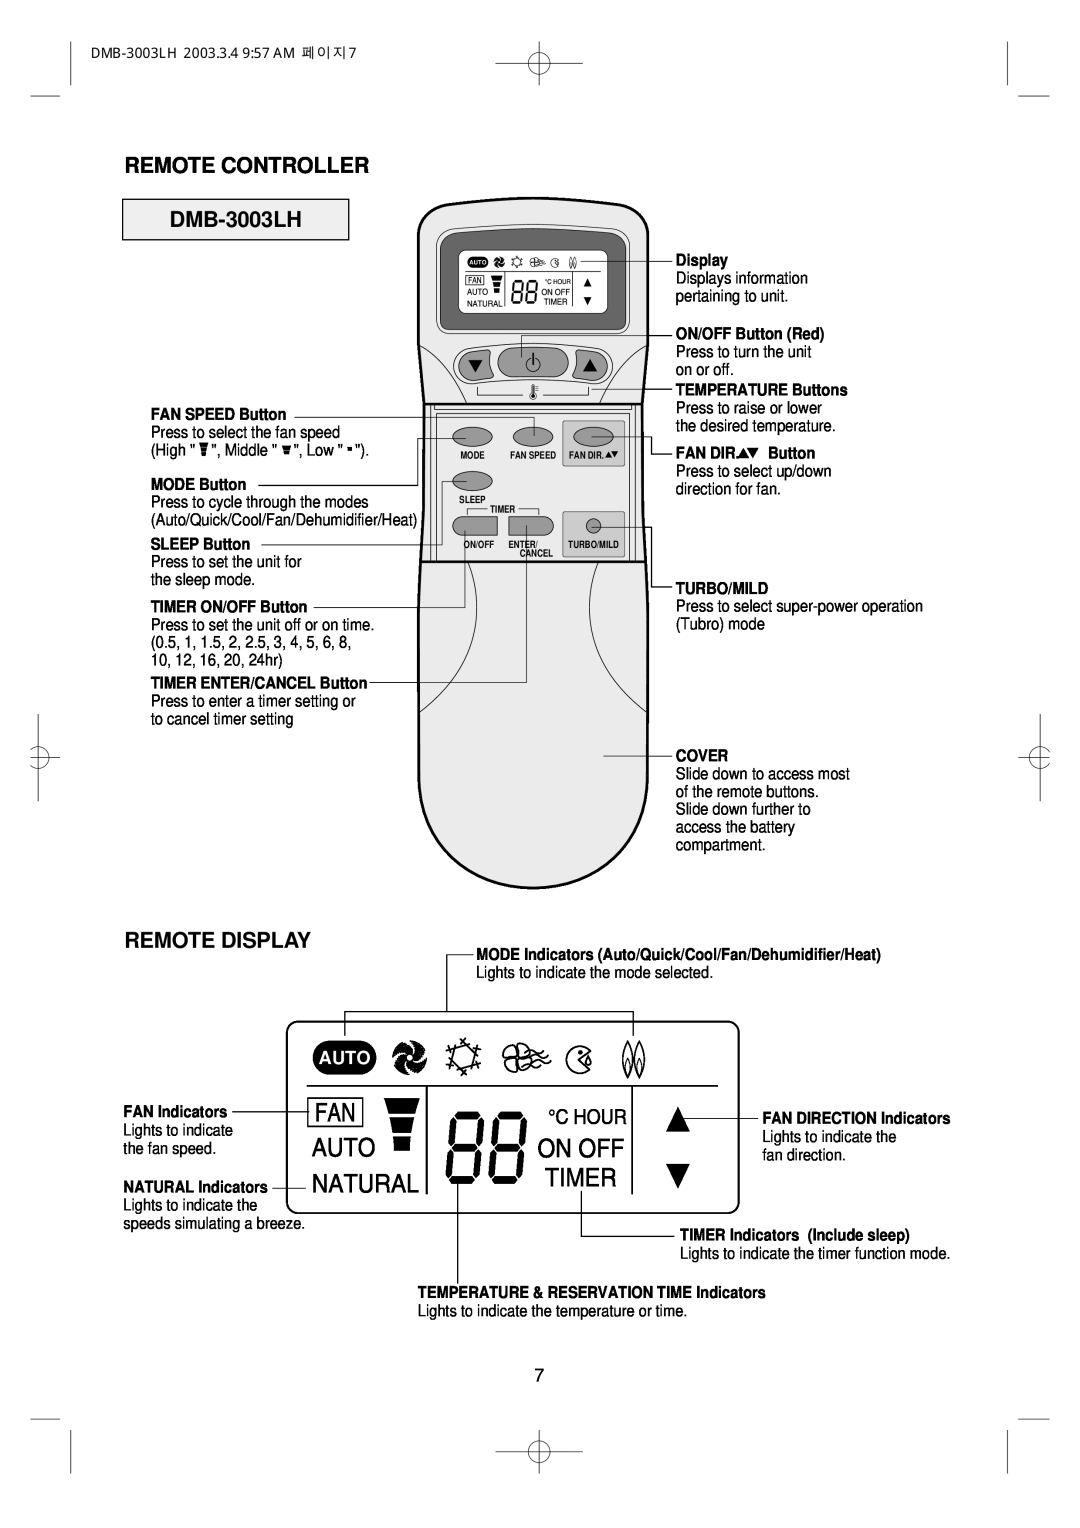 Daewoo owner manual REMOTE CONTROLLER DMB-3003LH, Remote Display, Auto, pertaining to unit 